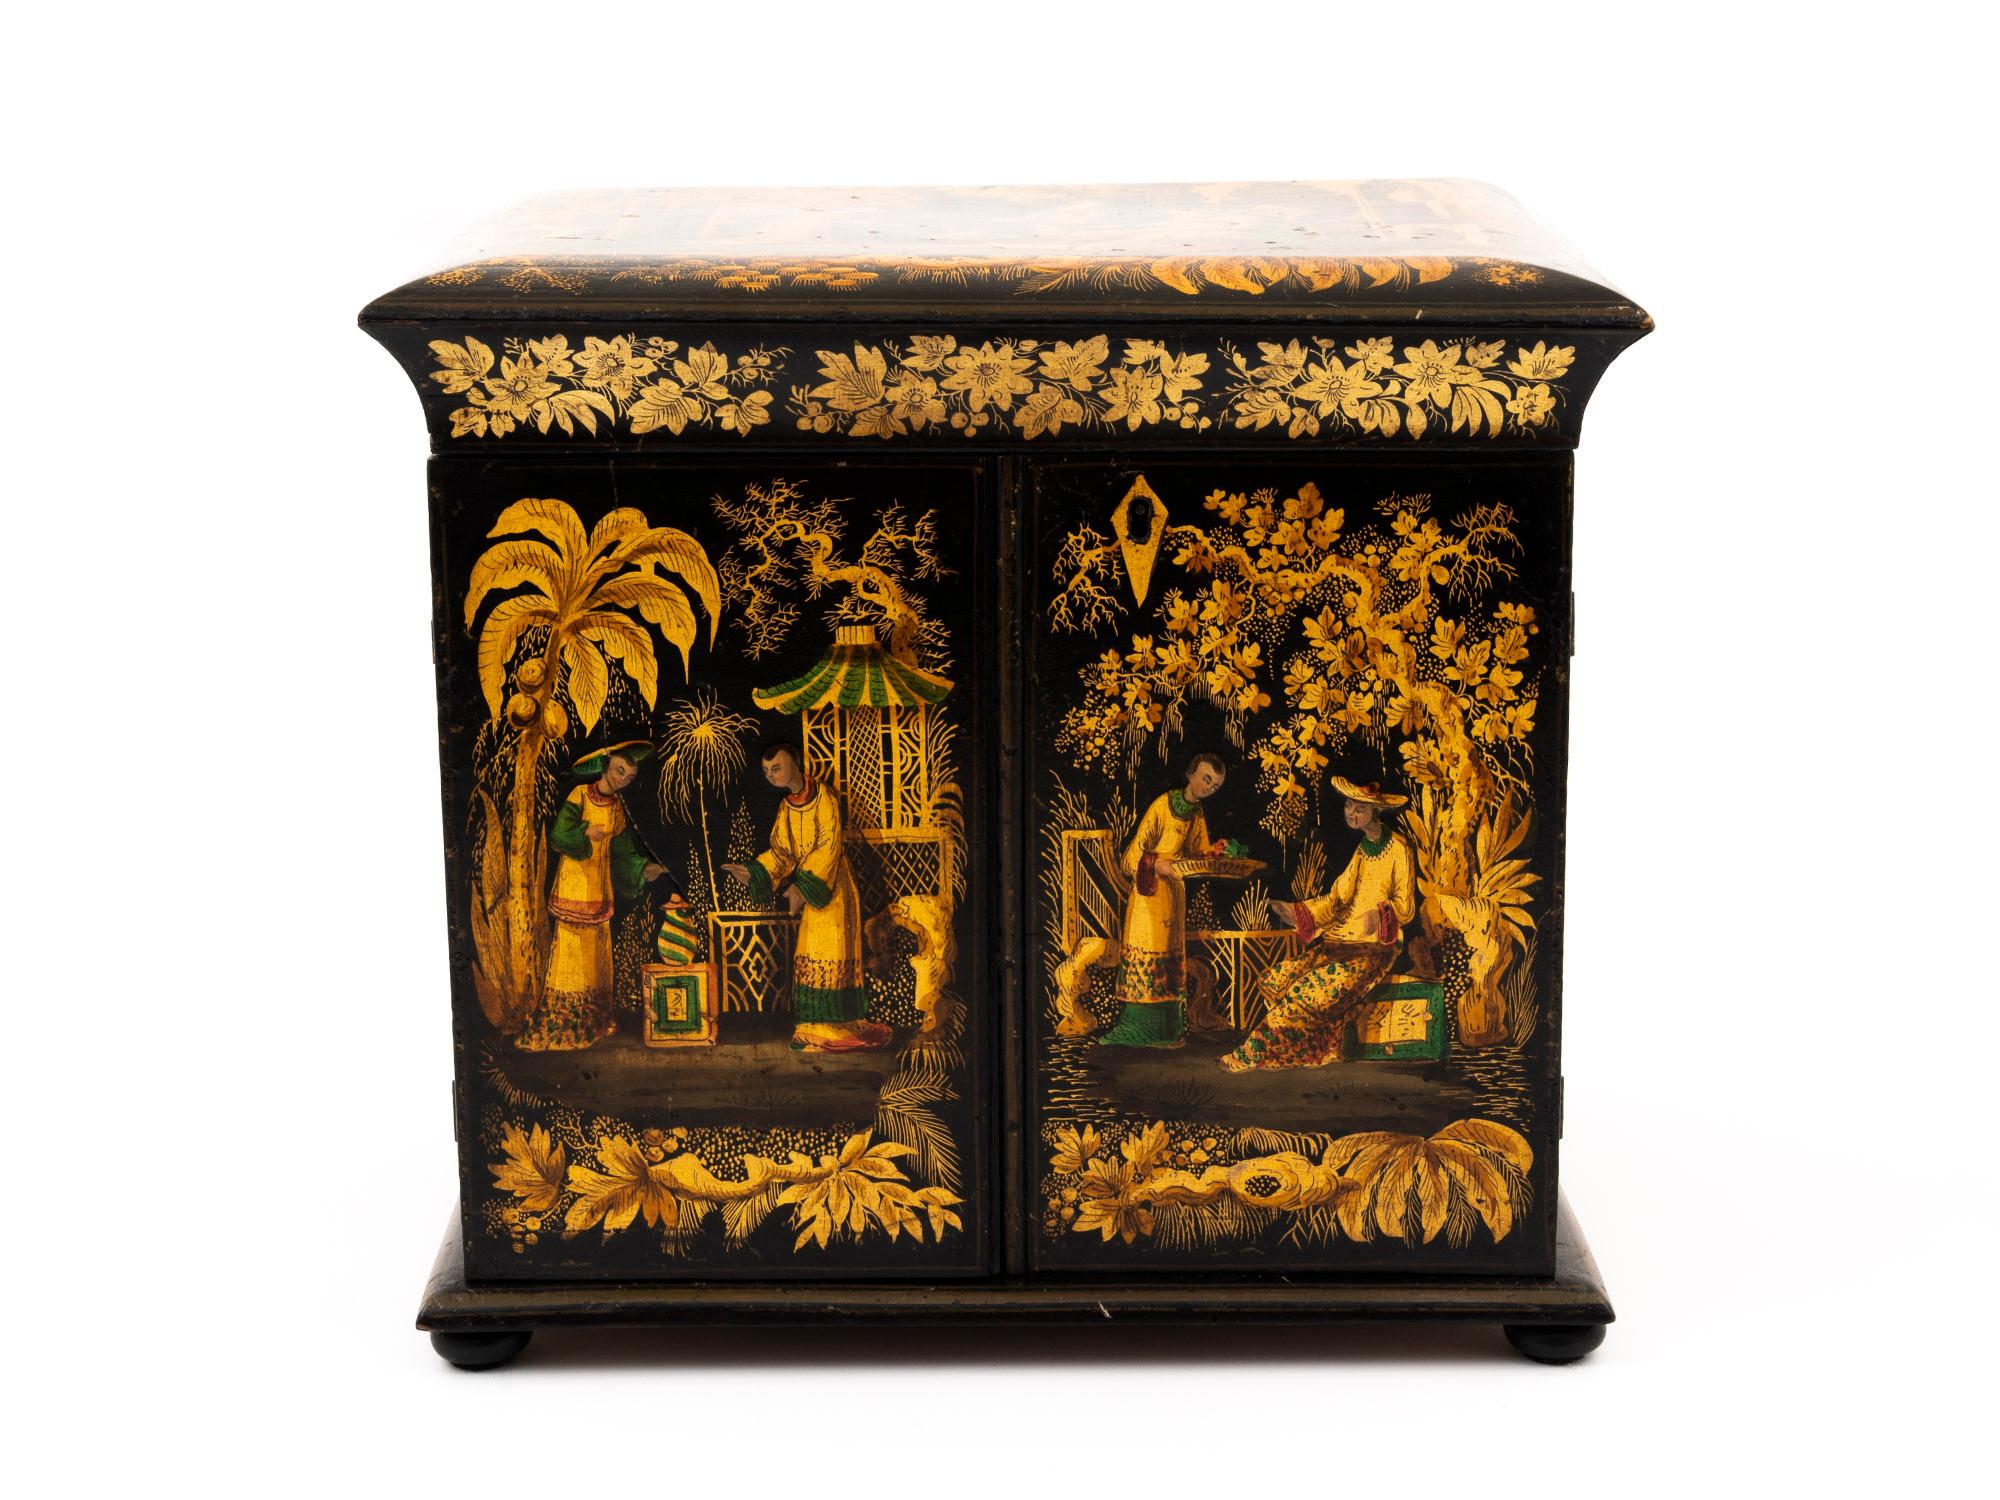 Regency Japanned sewing cabinet beautifully decorated with vibrant chinoiserie scenes.

The front and top of the Japanned table cabinet has detailed paintings of figures surrounded by beautiful garden scenes, while the sides have more simplistic